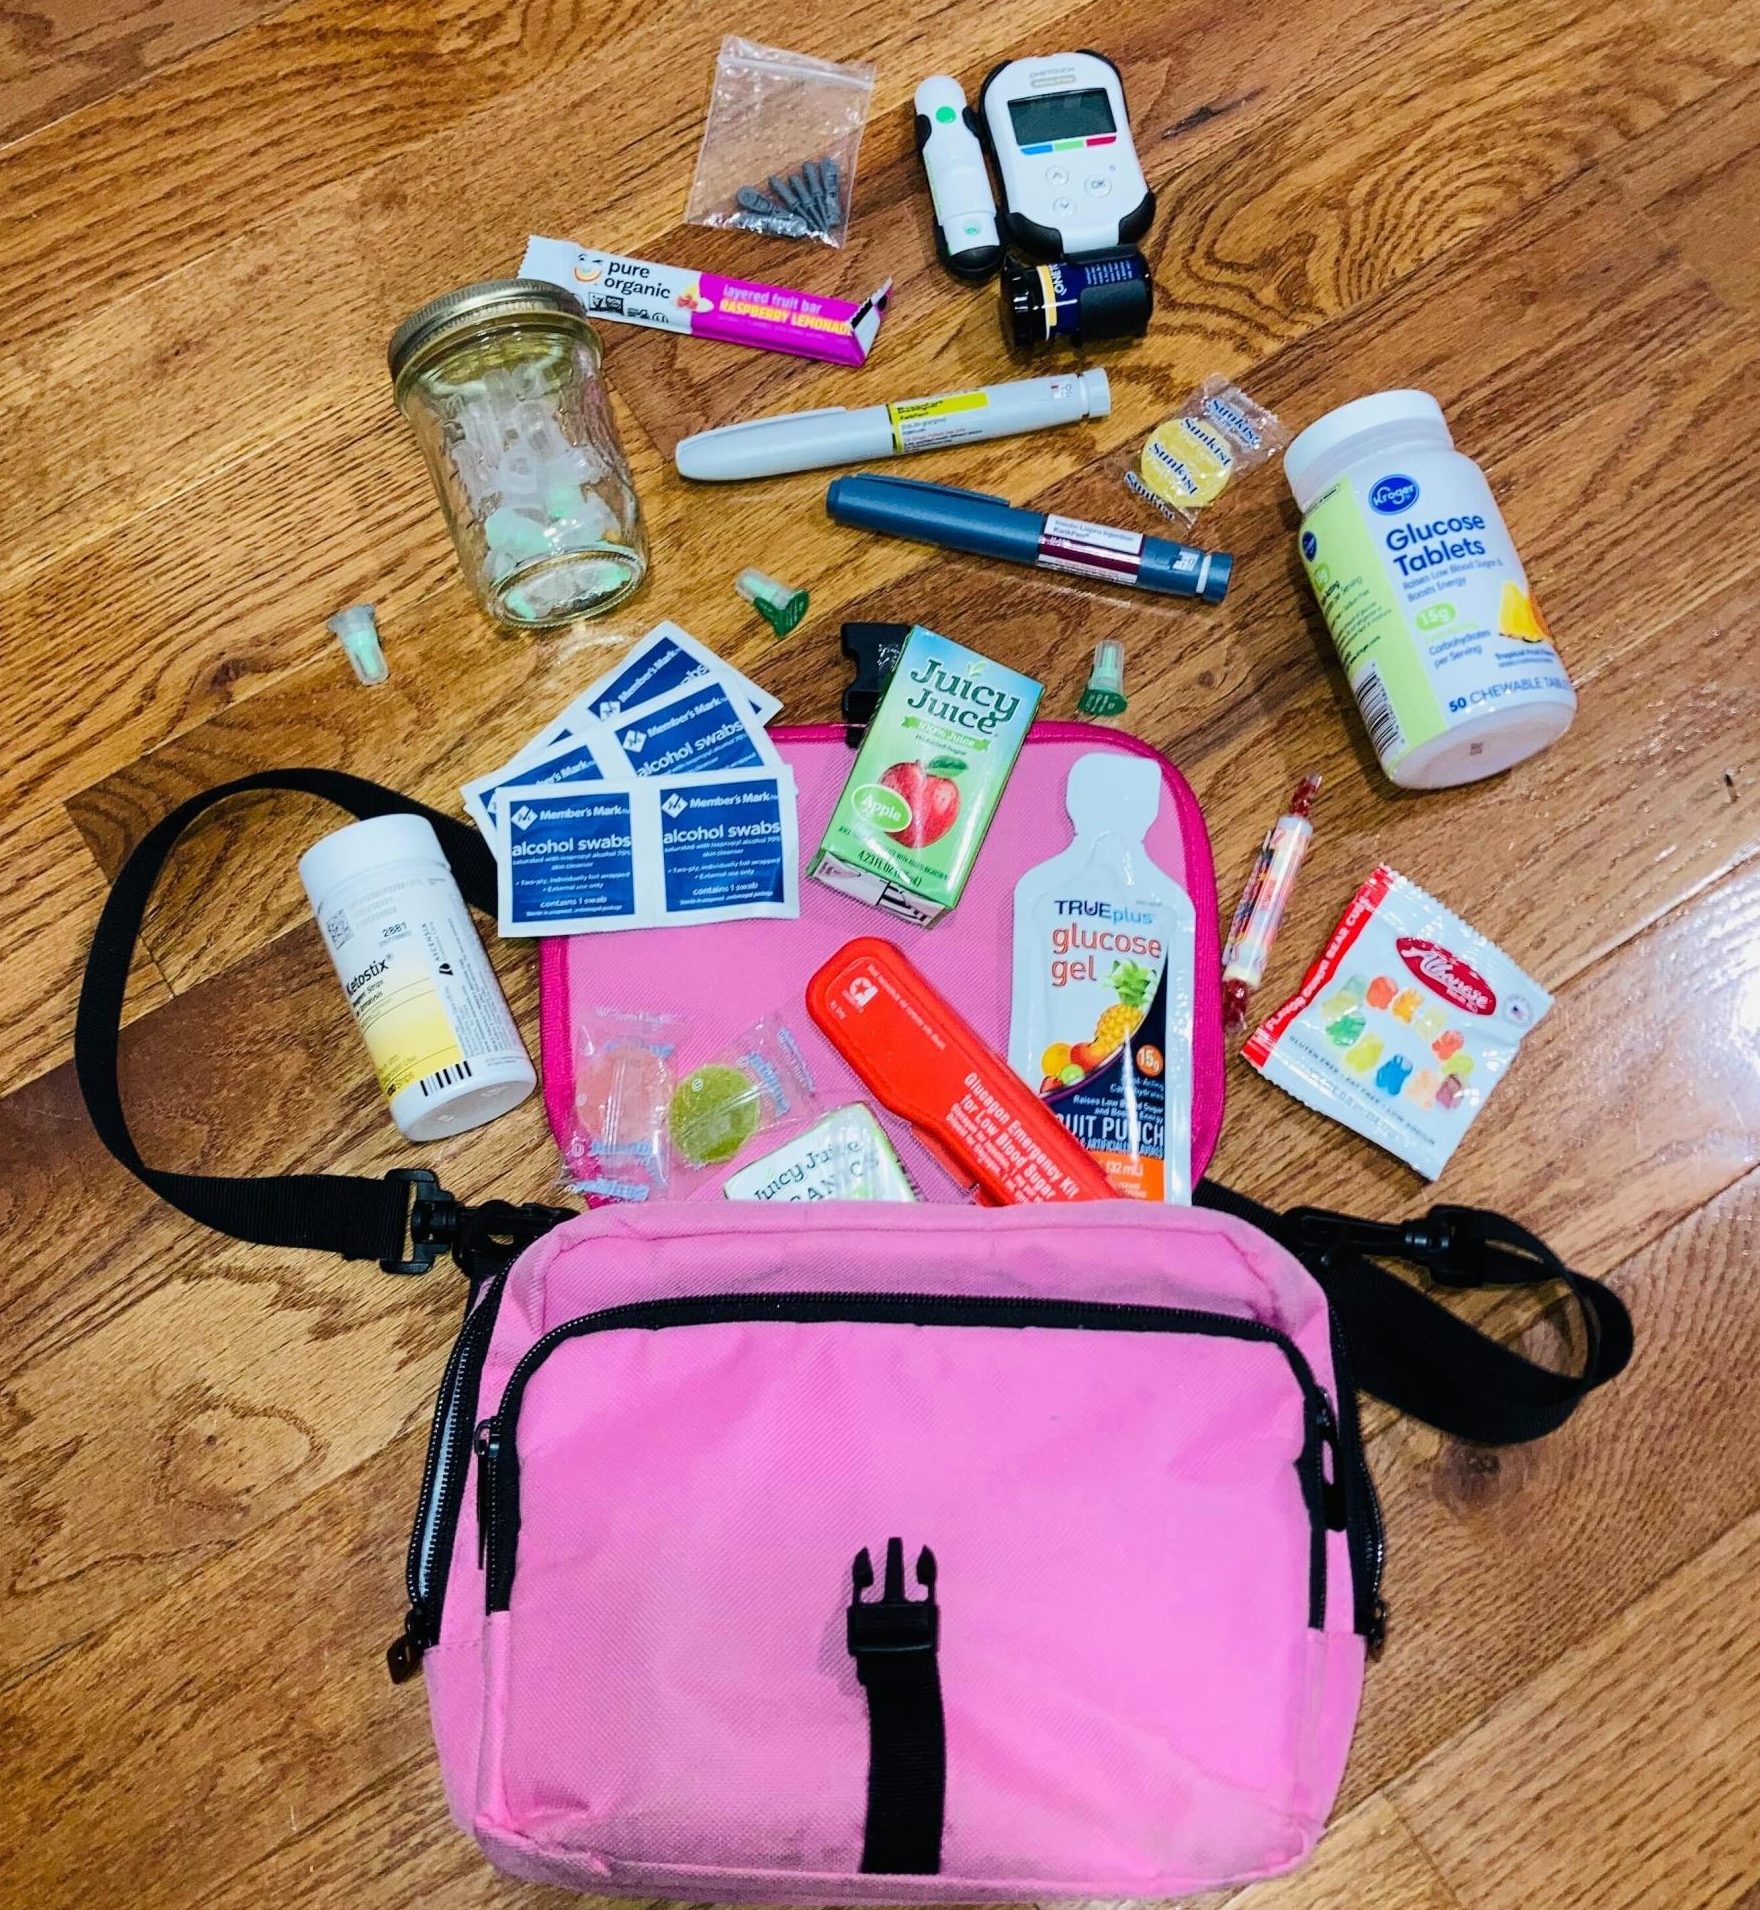 A bag containing important items that are important to have for those who have diabetes